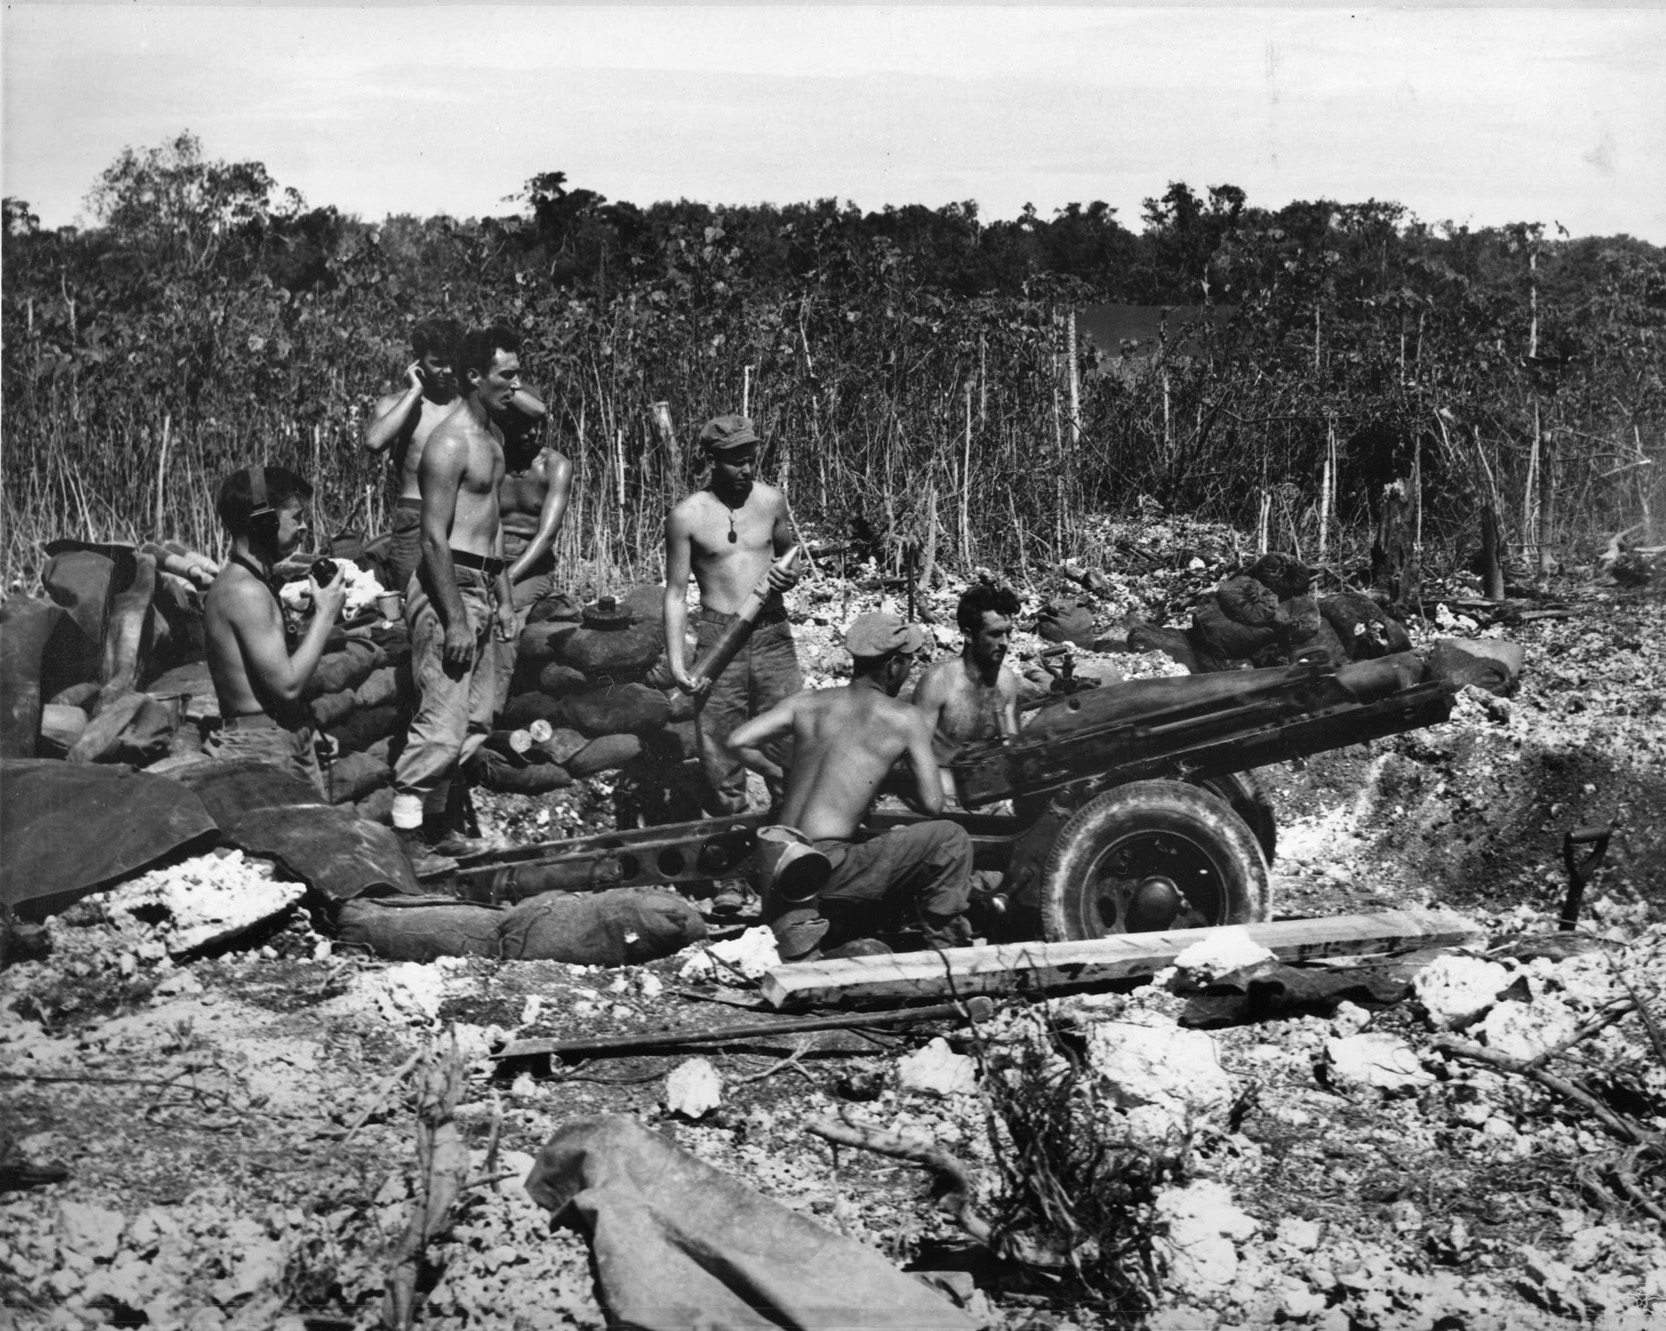 U.S. Marine artillerymen prepare a 75mm pack howitzer after it has been wrestled into firing position across the inhospitable terrain of Peleliu. The heavy but versatile pack howitzer brought successive Japanese positions under heavy fire. 